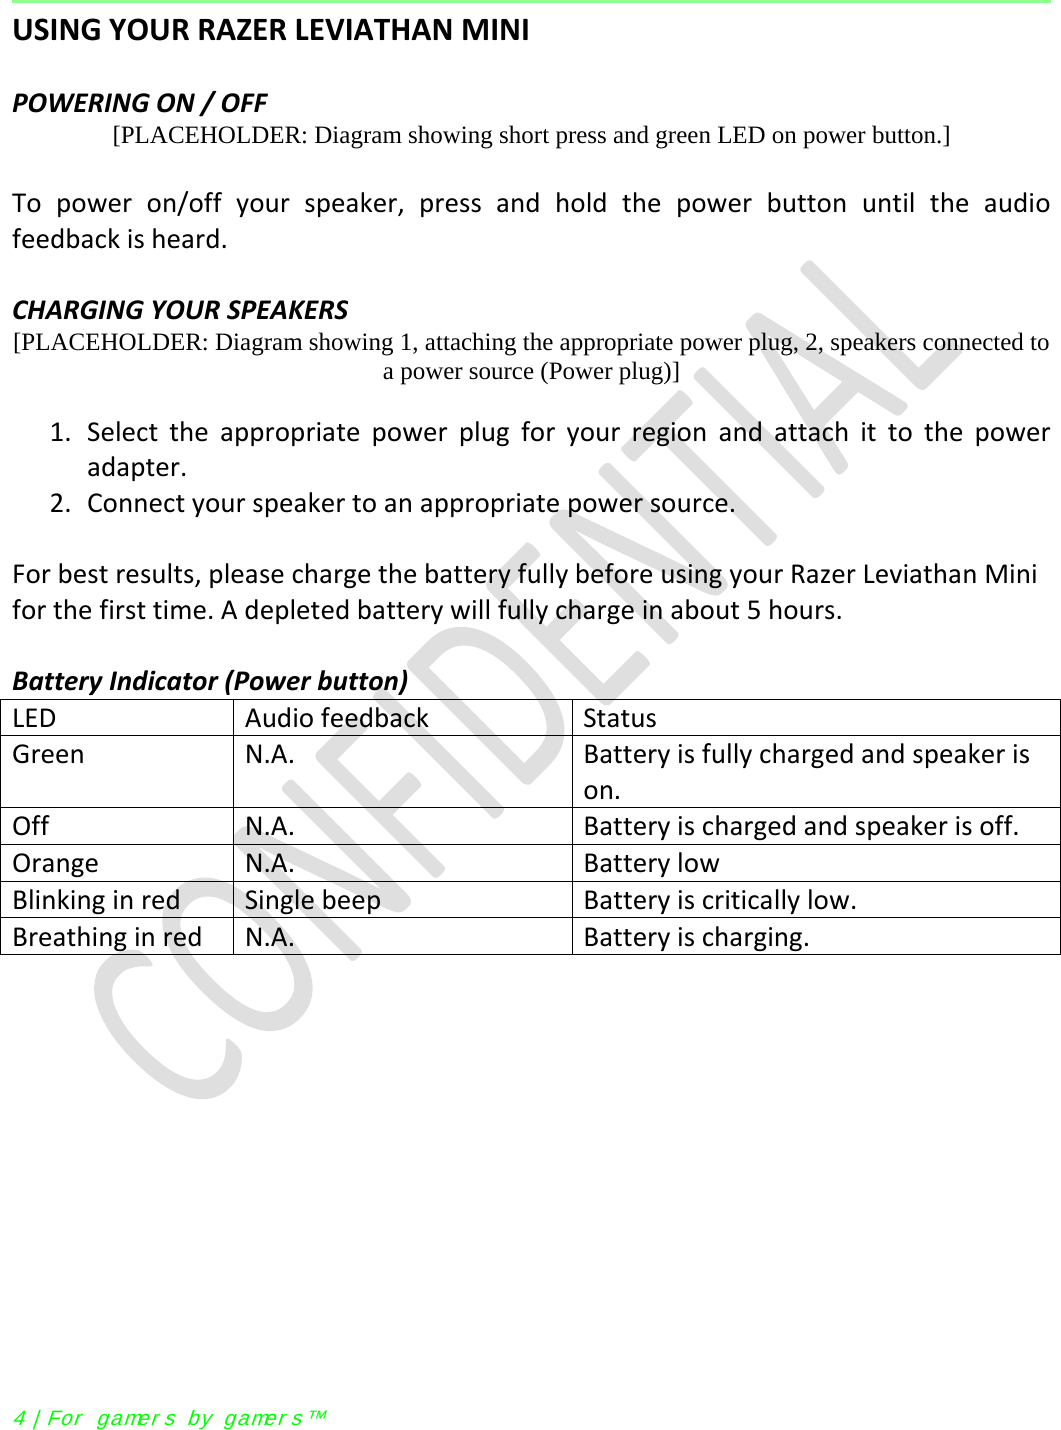   USING YOUR RAZER LEVIATHAN MINI  POWERING ON / OFF [PLACEHOLDER: Diagram showing short press and green LED on power button.]  To  power on/off your speaker, press  and hold the power button until the audio feedback is heard.  CHARGING YOUR SPEAKERS [PLACEHOLDER: Diagram showing 1, attaching the appropriate power plug, 2, speakers connected to a power source (Power plug)]  1. Select the appropriate power plug for your region and attach it to the power adapter. 2. Connect your speaker to an appropriate power source.  For best results, please charge the battery fully before using your Razer Leviathan Mini for the first time. A depleted battery will fully charge in about 5 hours.  Battery Indicator (Power button) LED Audio feedback Status Green N.A. Battery is fully charged and speaker is on. Off N.A. Battery is charged and speaker is off. Orange N.A. Battery low Blinking in red Single beep Battery is critically low. Breathing in red N.A. Battery is charging.  4  | For  gamer s by gamer s™ 